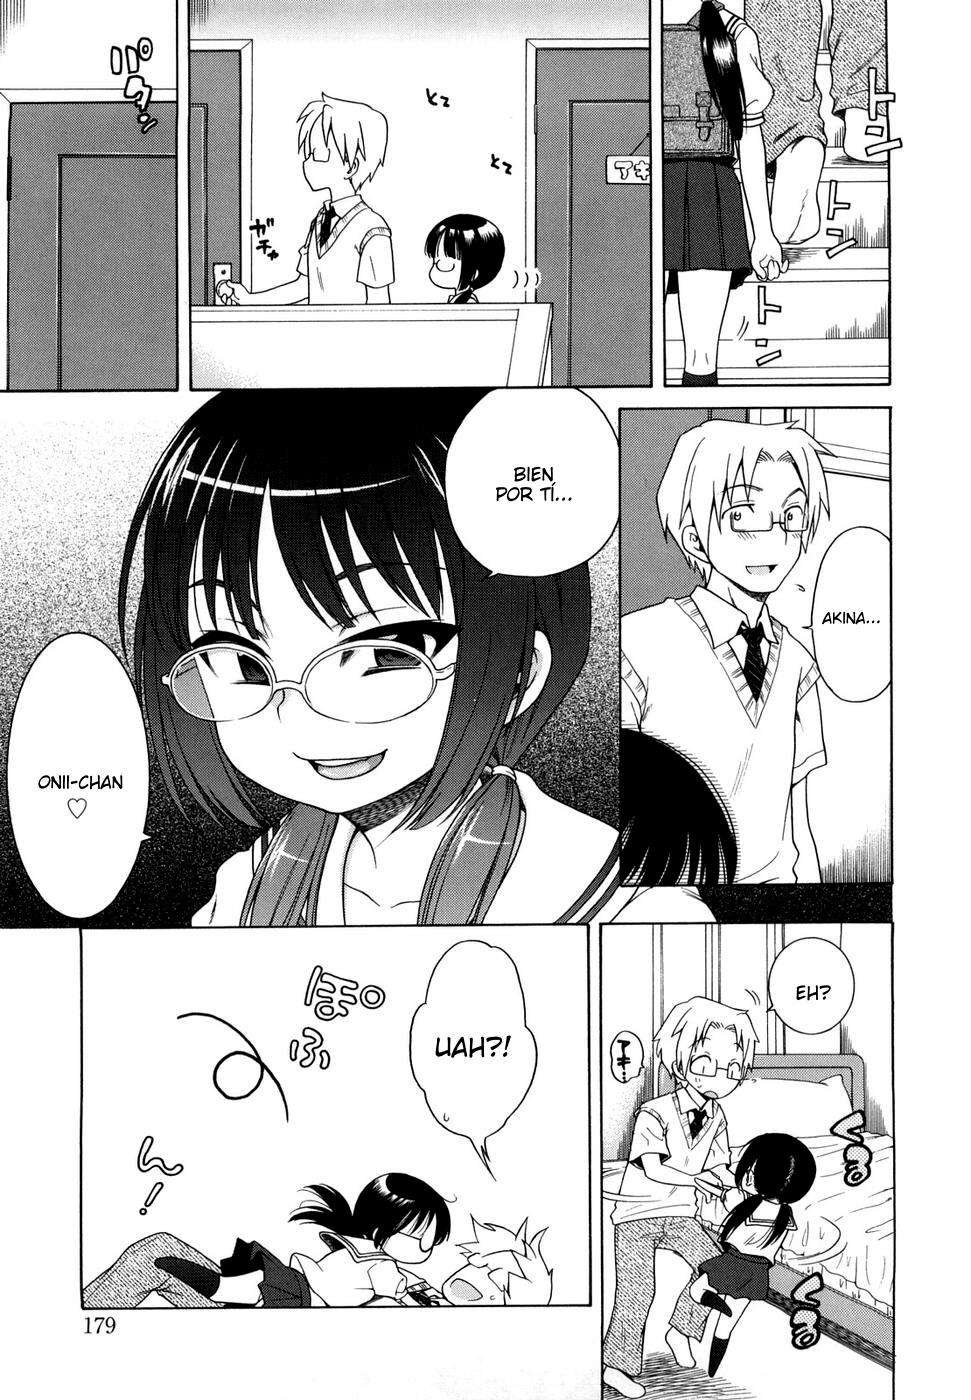 Me gustas Onii-chan! Chapter-10 - 3